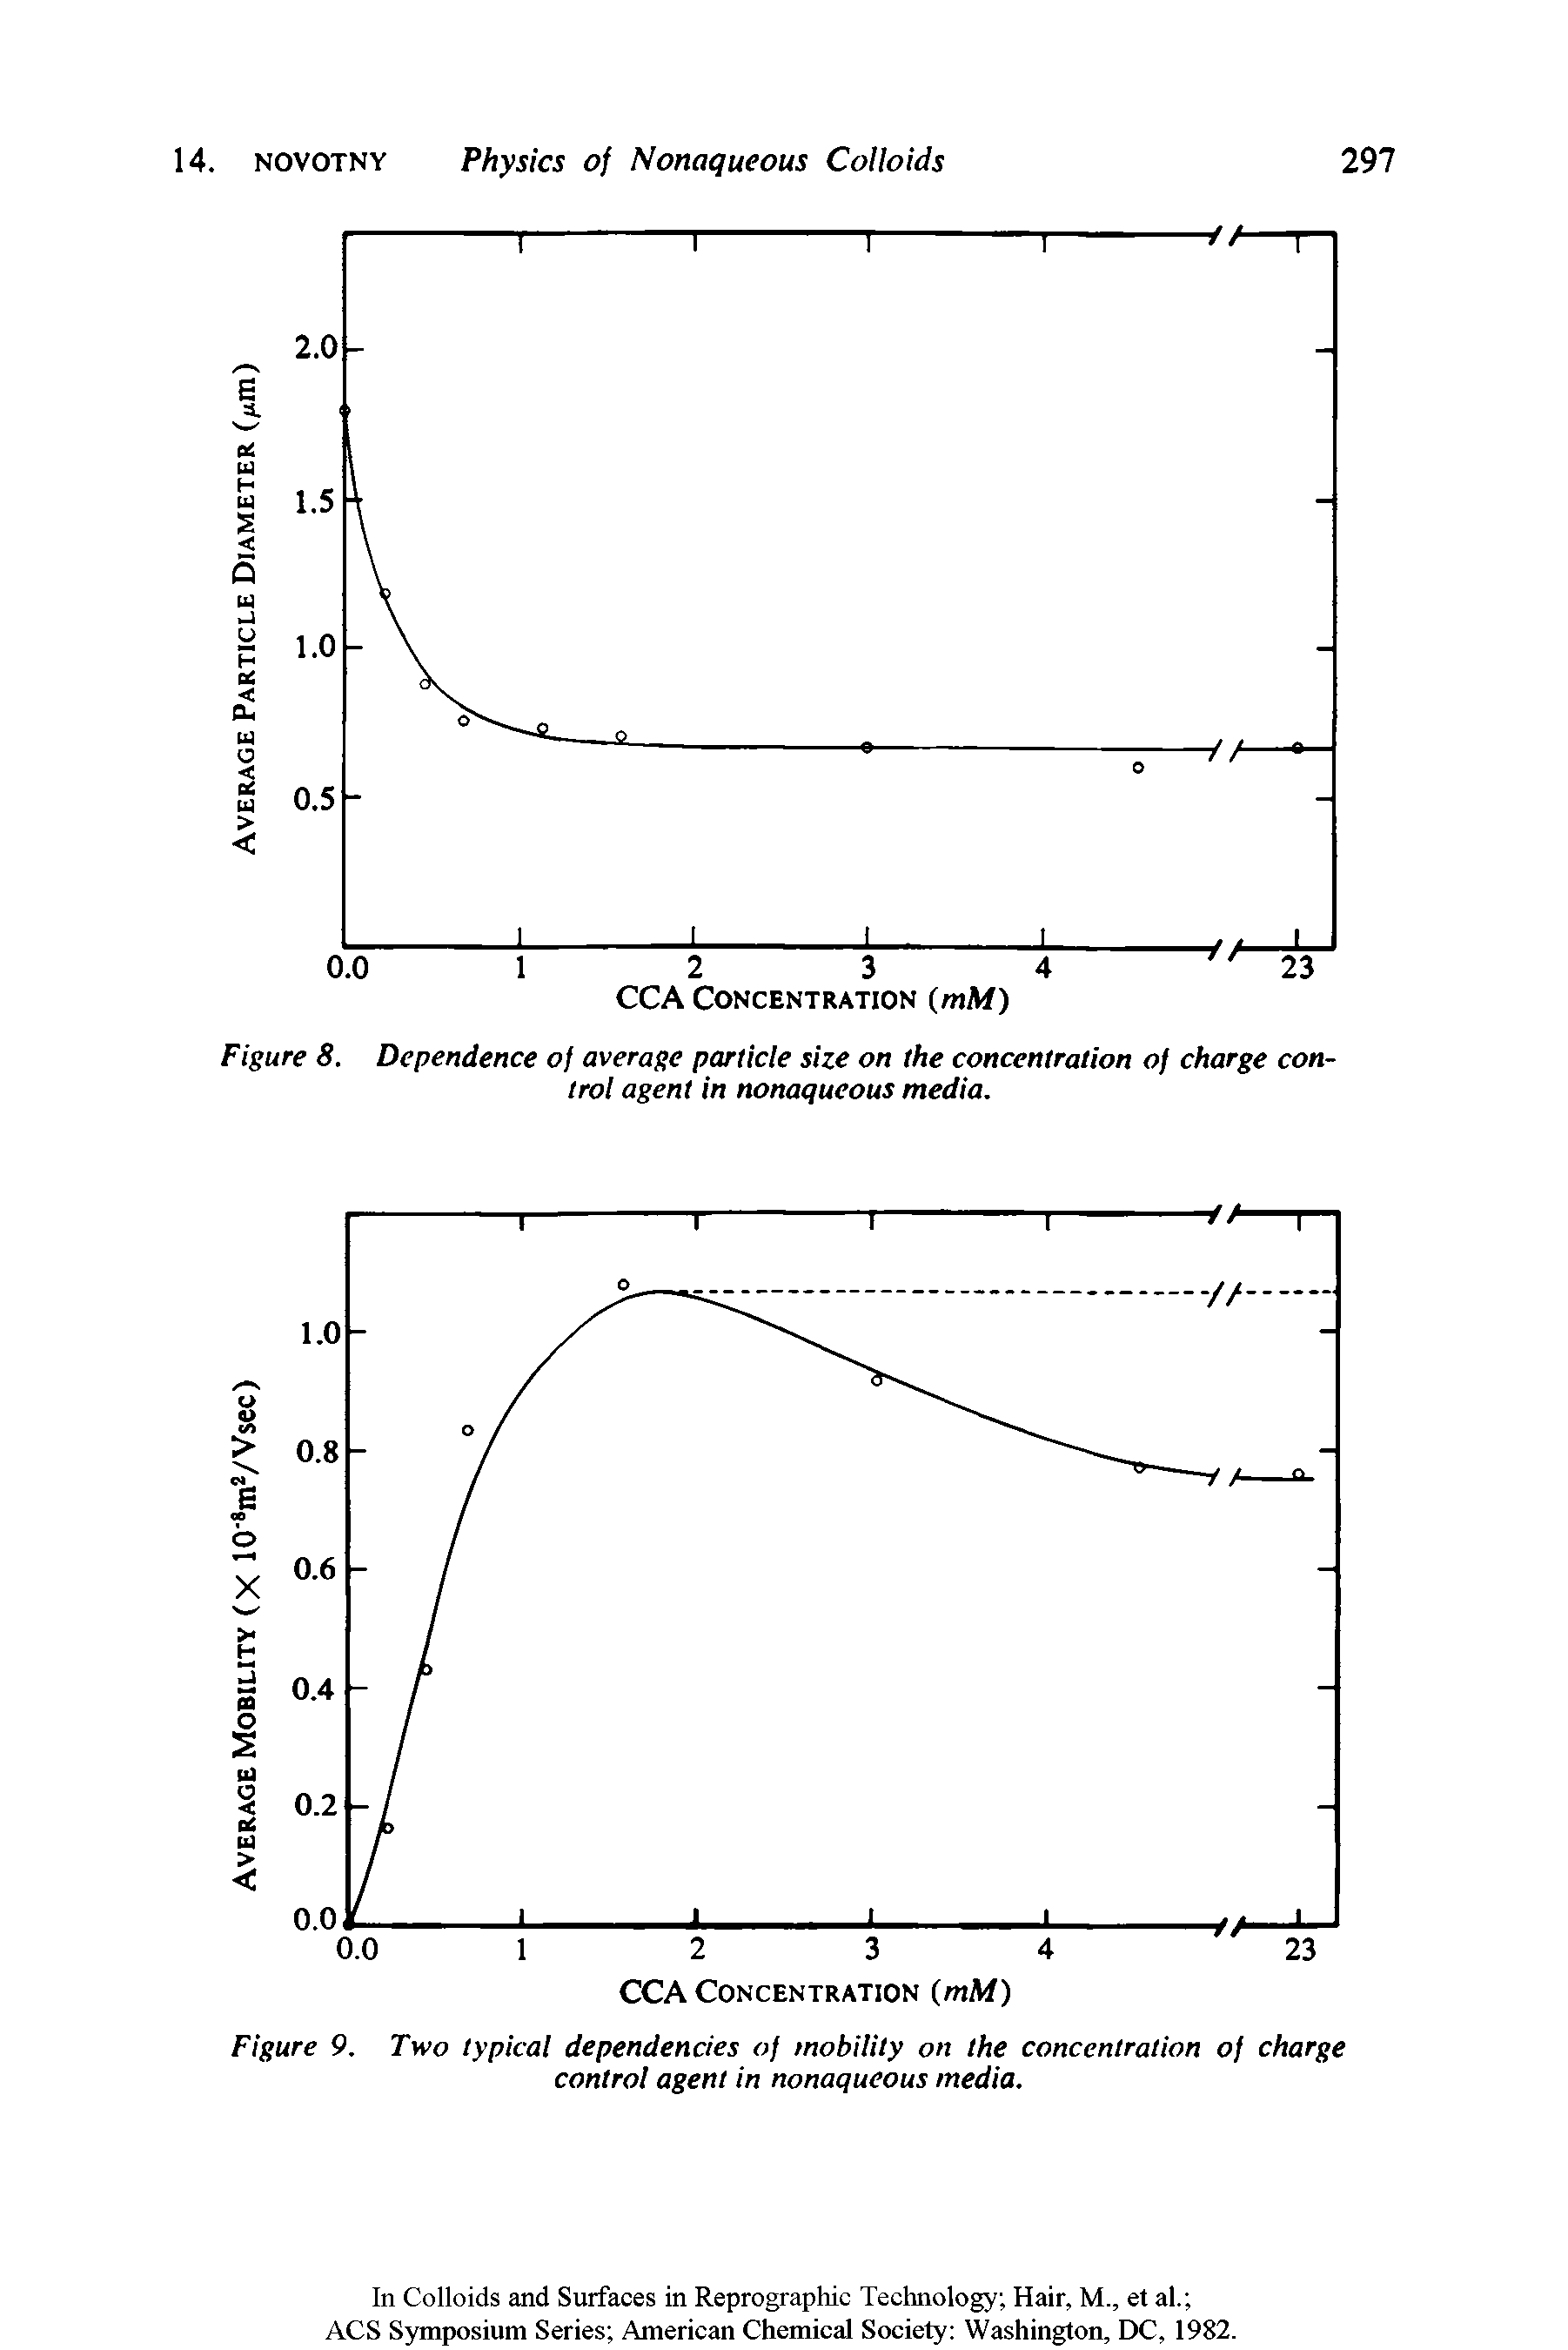 Figure 8. Dependence of average particle size on the concentration of charge control agent in nonaqueous media.